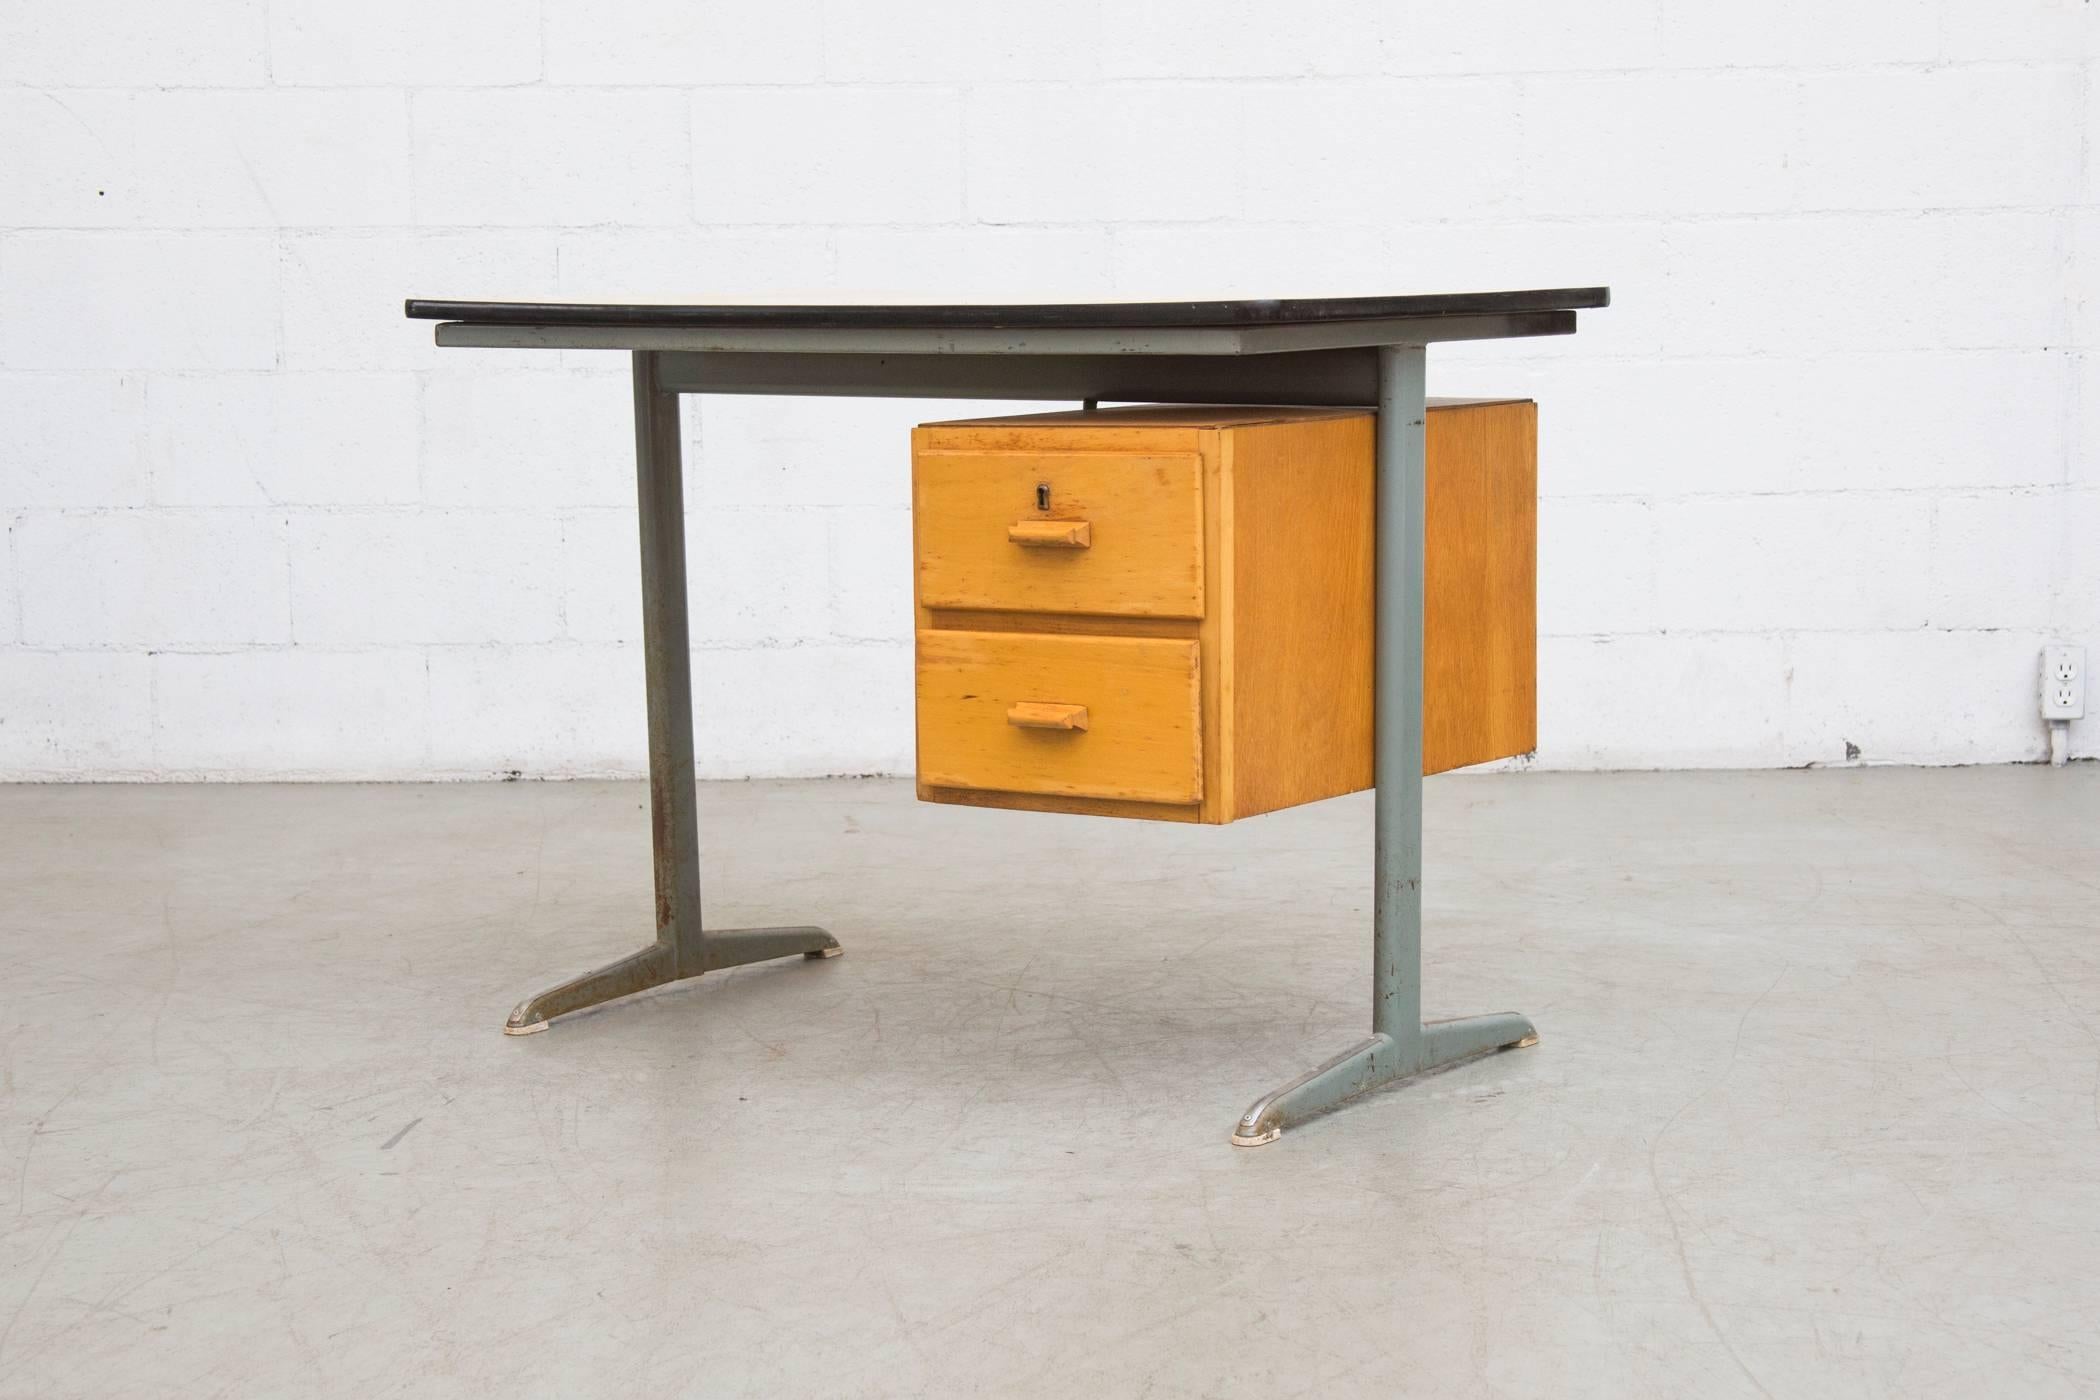 Cute little Industrial Dutch school desk with original metal frame and birch side stacking drawers and formica top. The desk is in original condition with visible signs of wear. A second one is available, please request pictures for its condition.